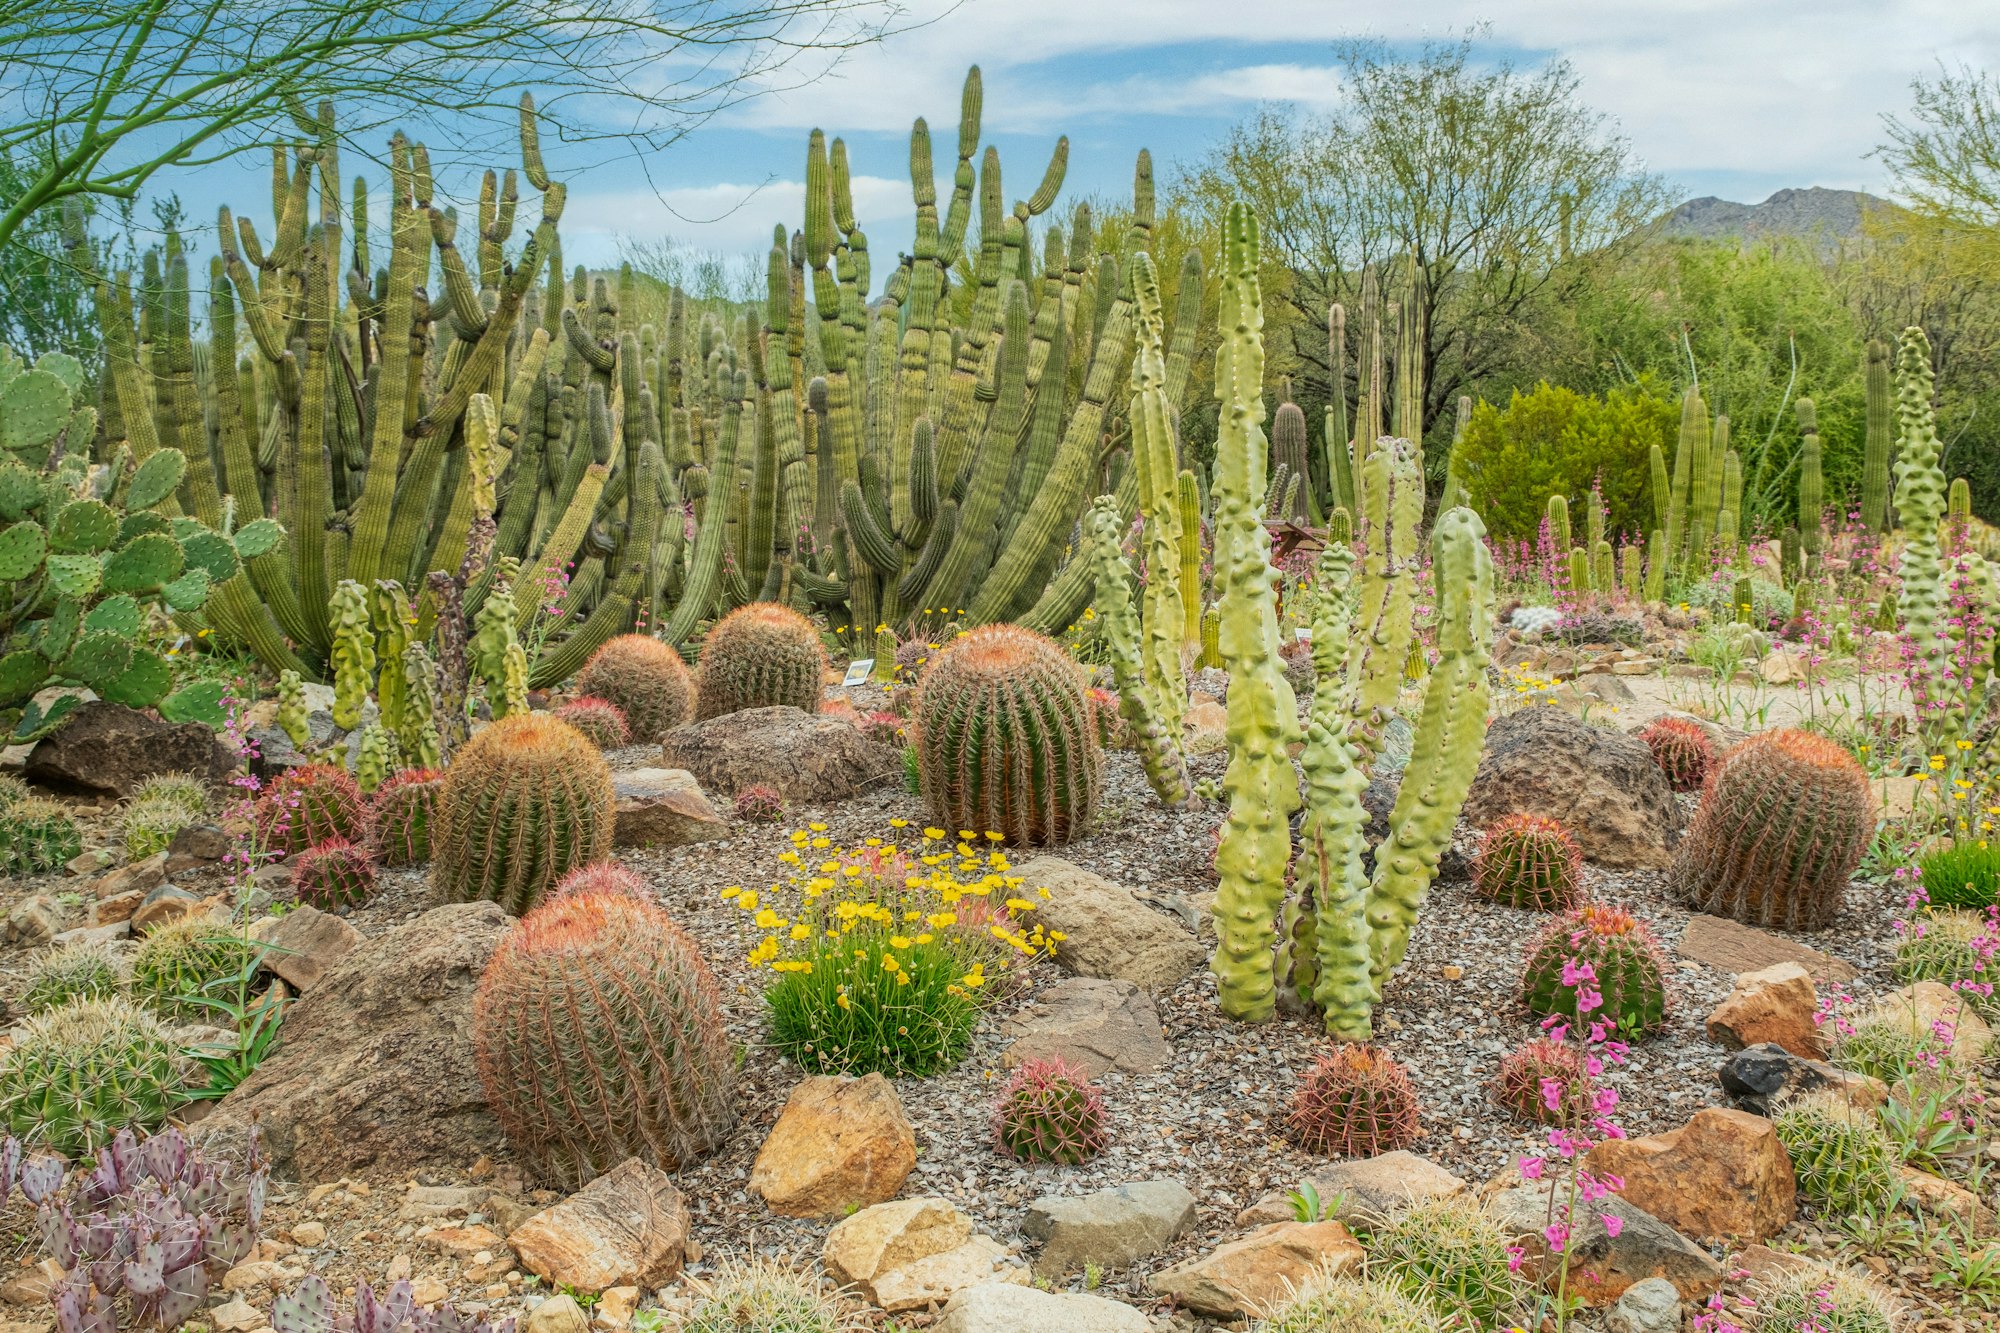 Mixed Cacti in the Desert